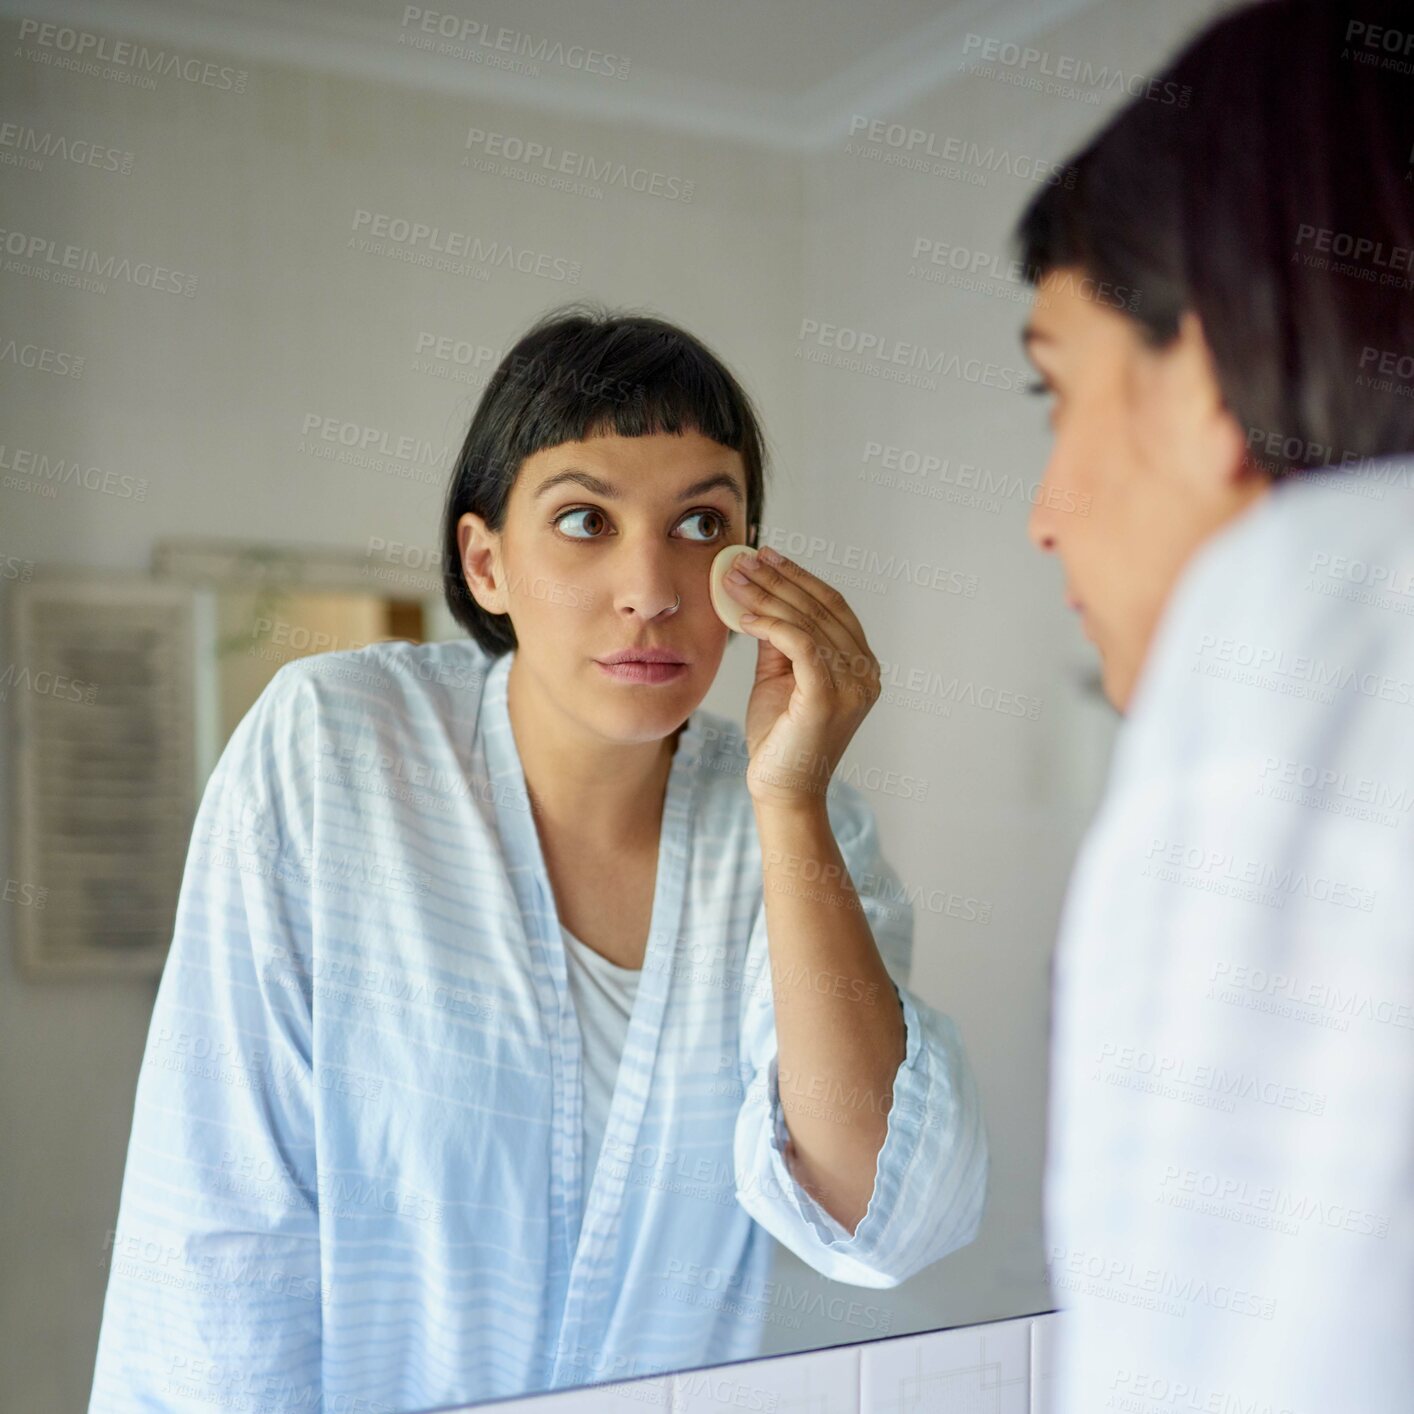 Buy stock photo Shot of a young woman in a bathrobe applying foundation in her bathroom mirror in the morning